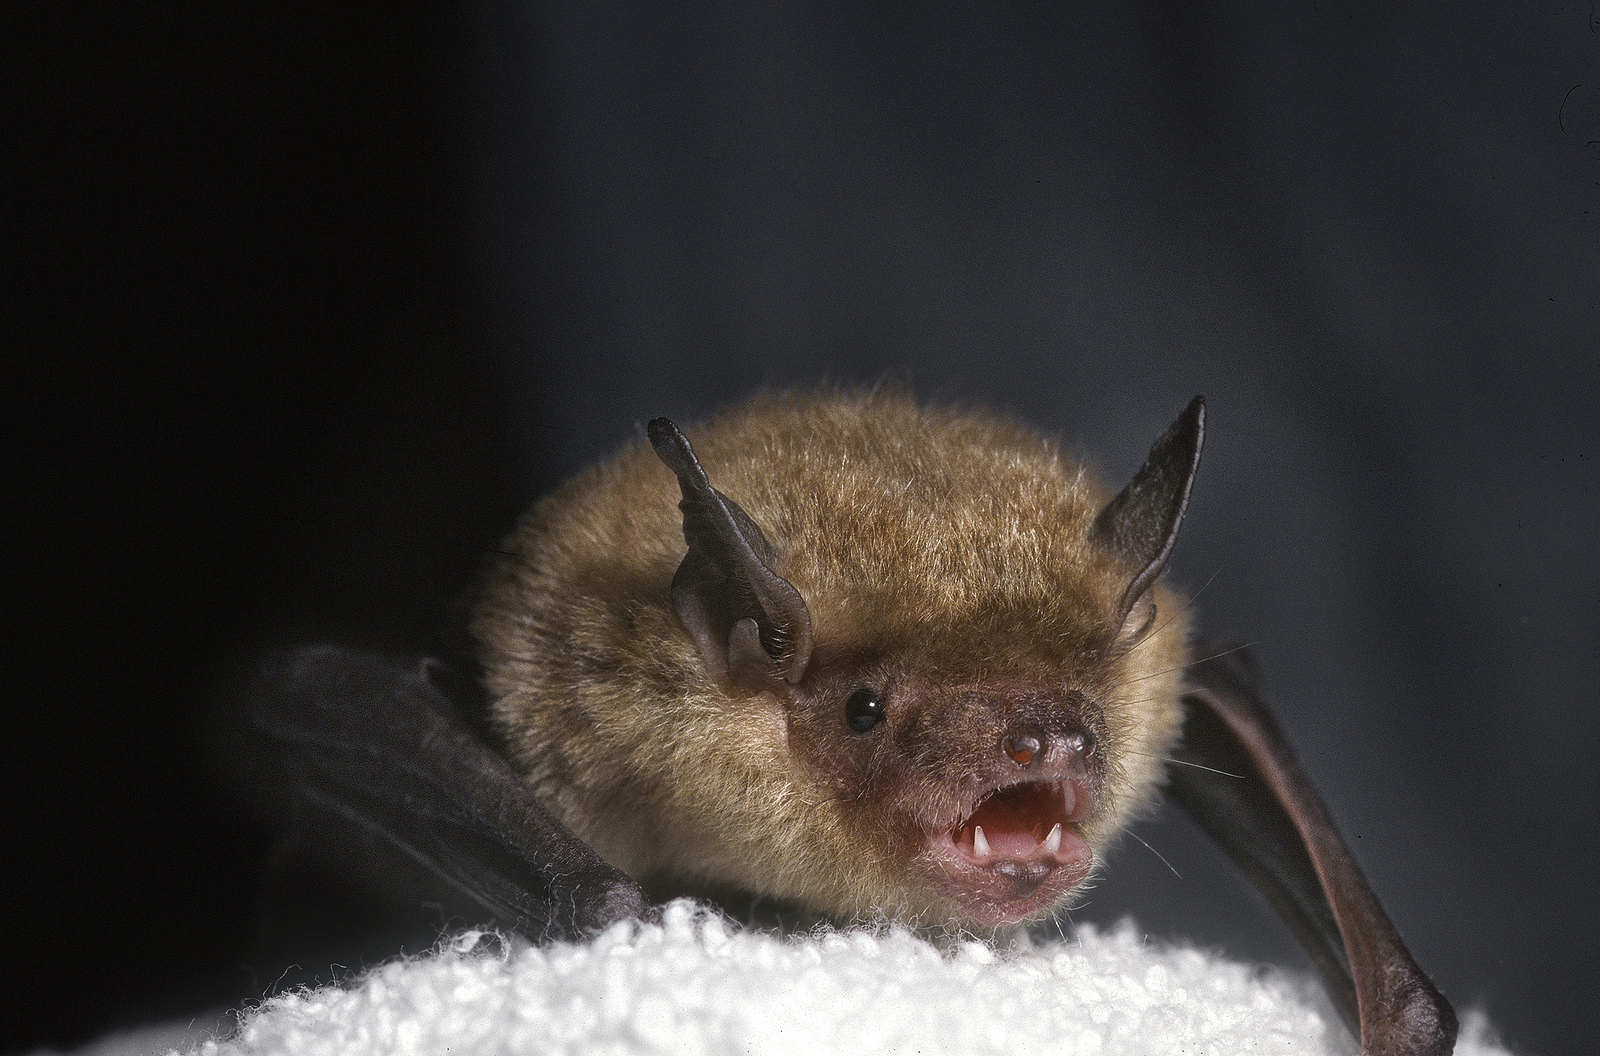 Bat ears are often five or more times the size of a bat’s head. Their unique use of echolocation enables them to “see” their world and detect prey, by emitting short bursts of high-pitch sounds that bounce off objects and return to the bat as echoes.